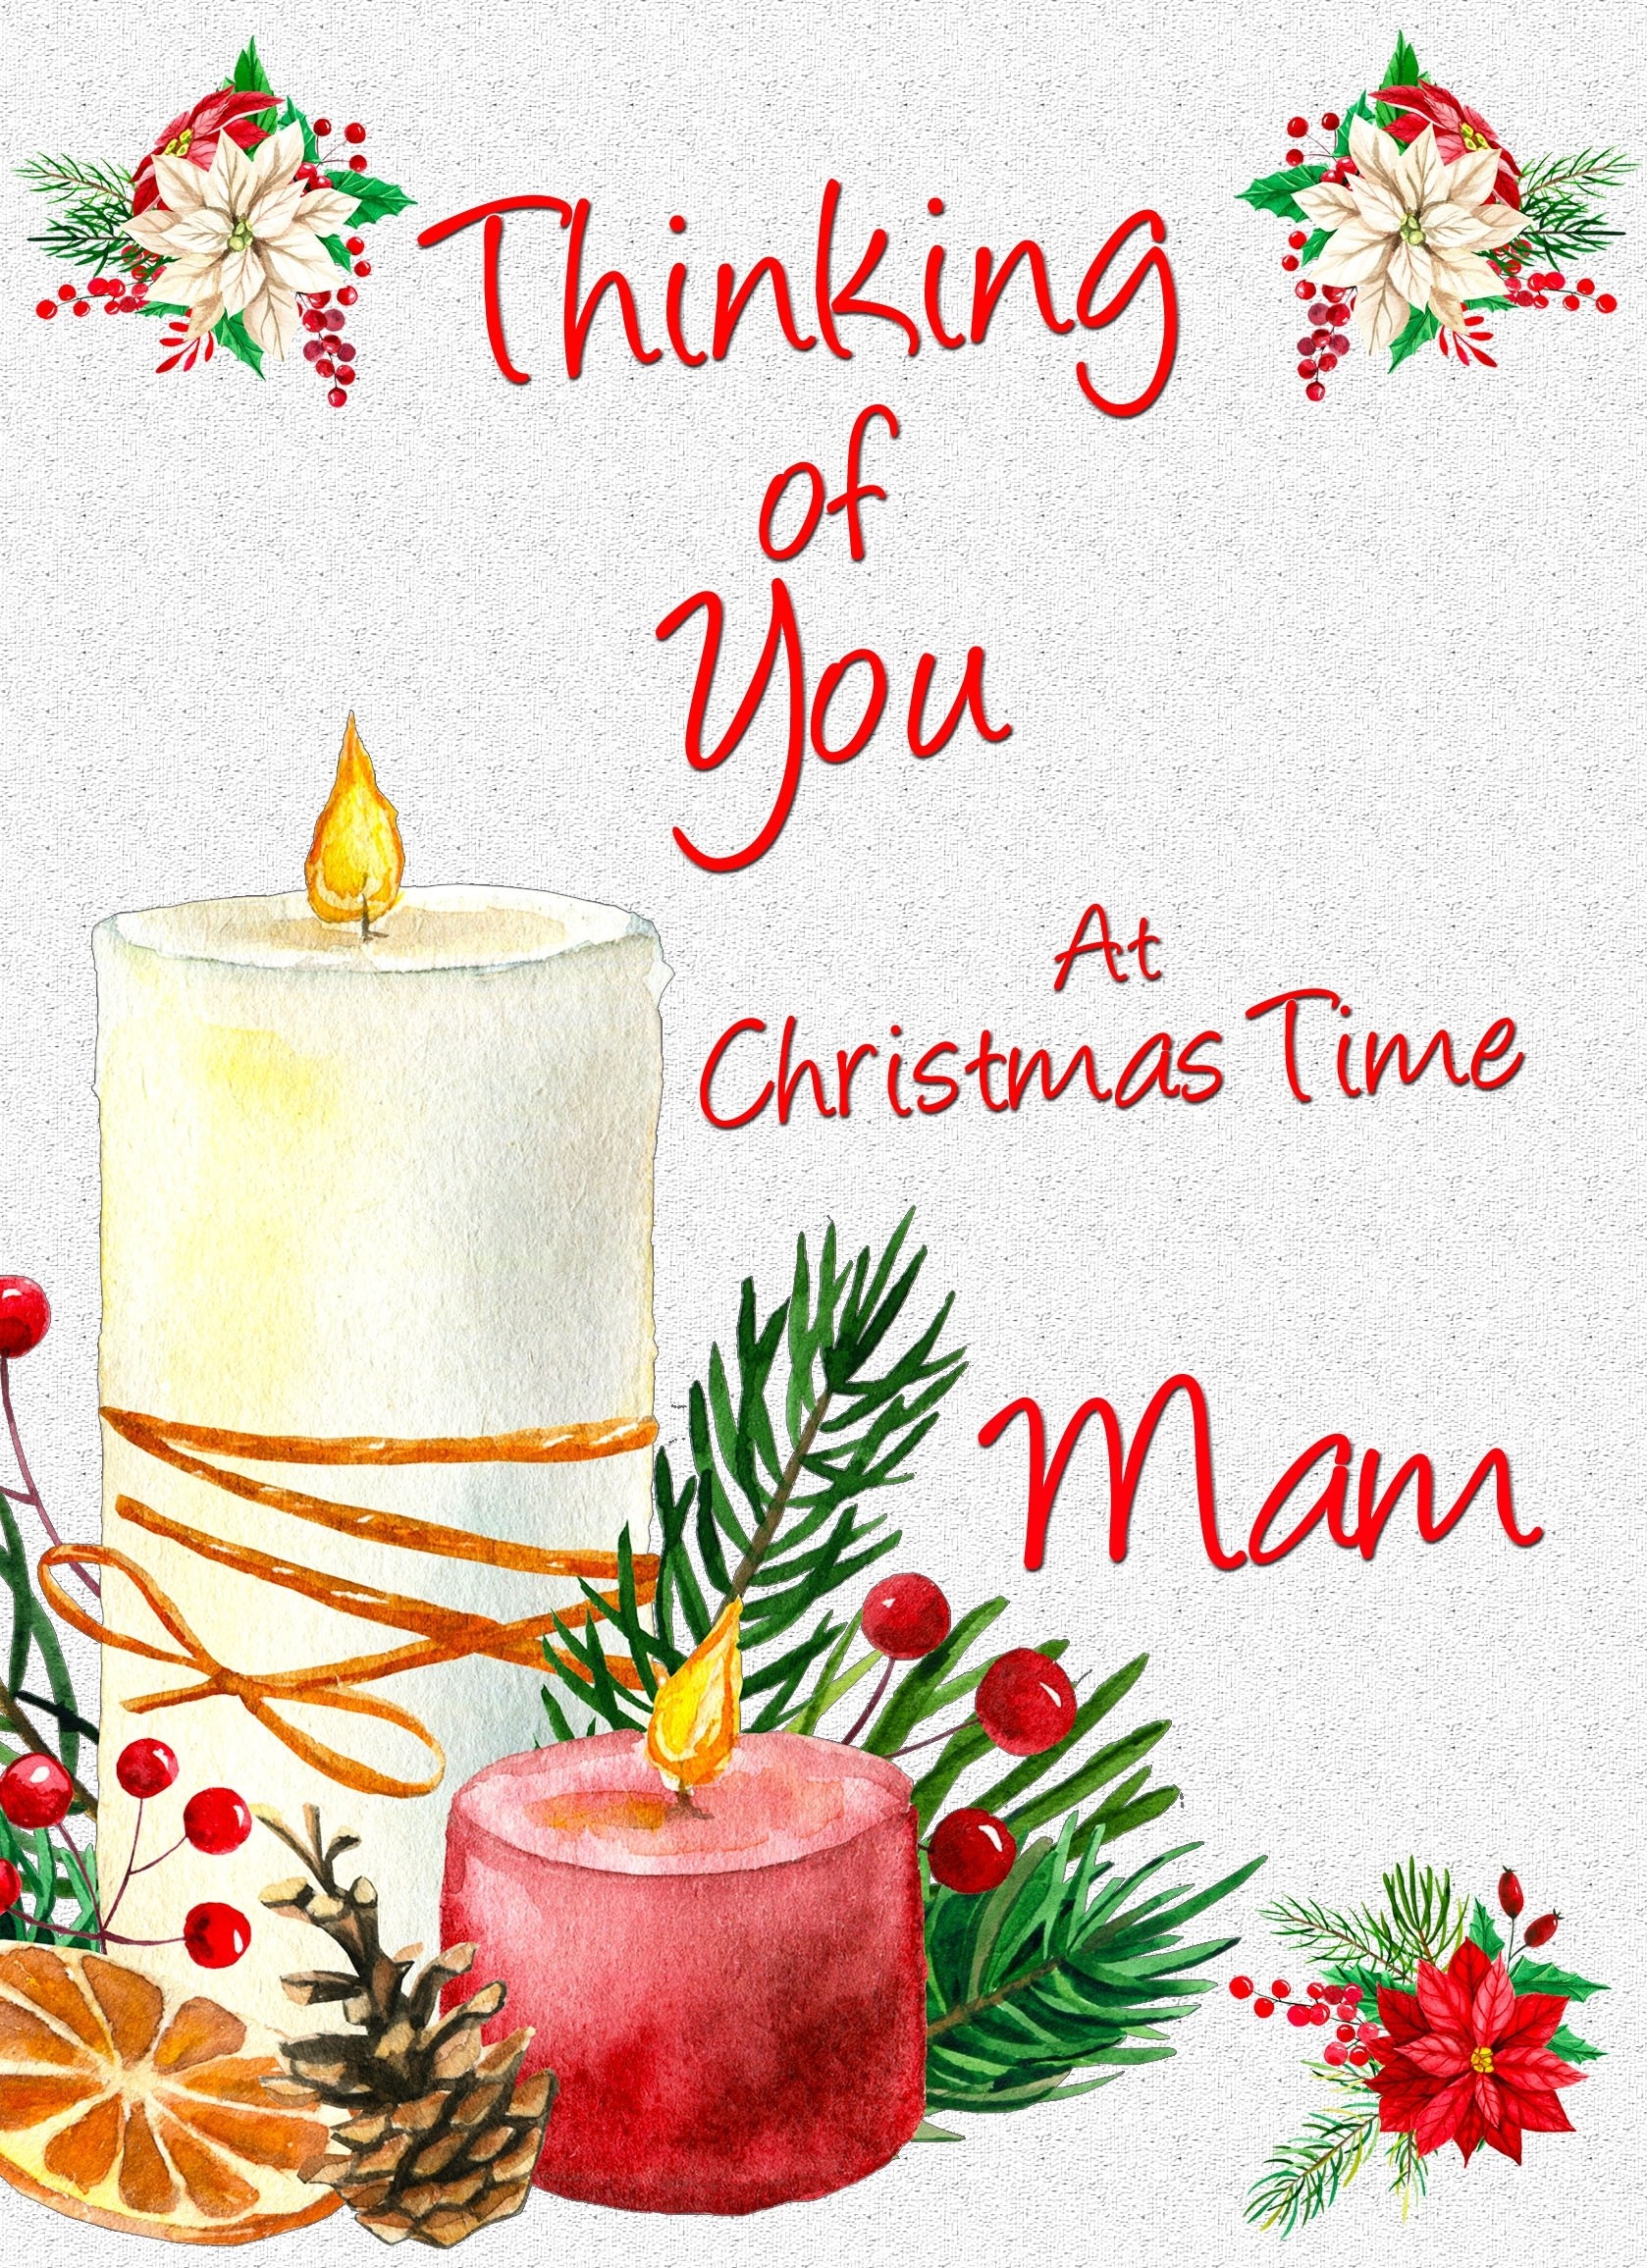 Thinking of You at Christmas Card For Mam (Candle)